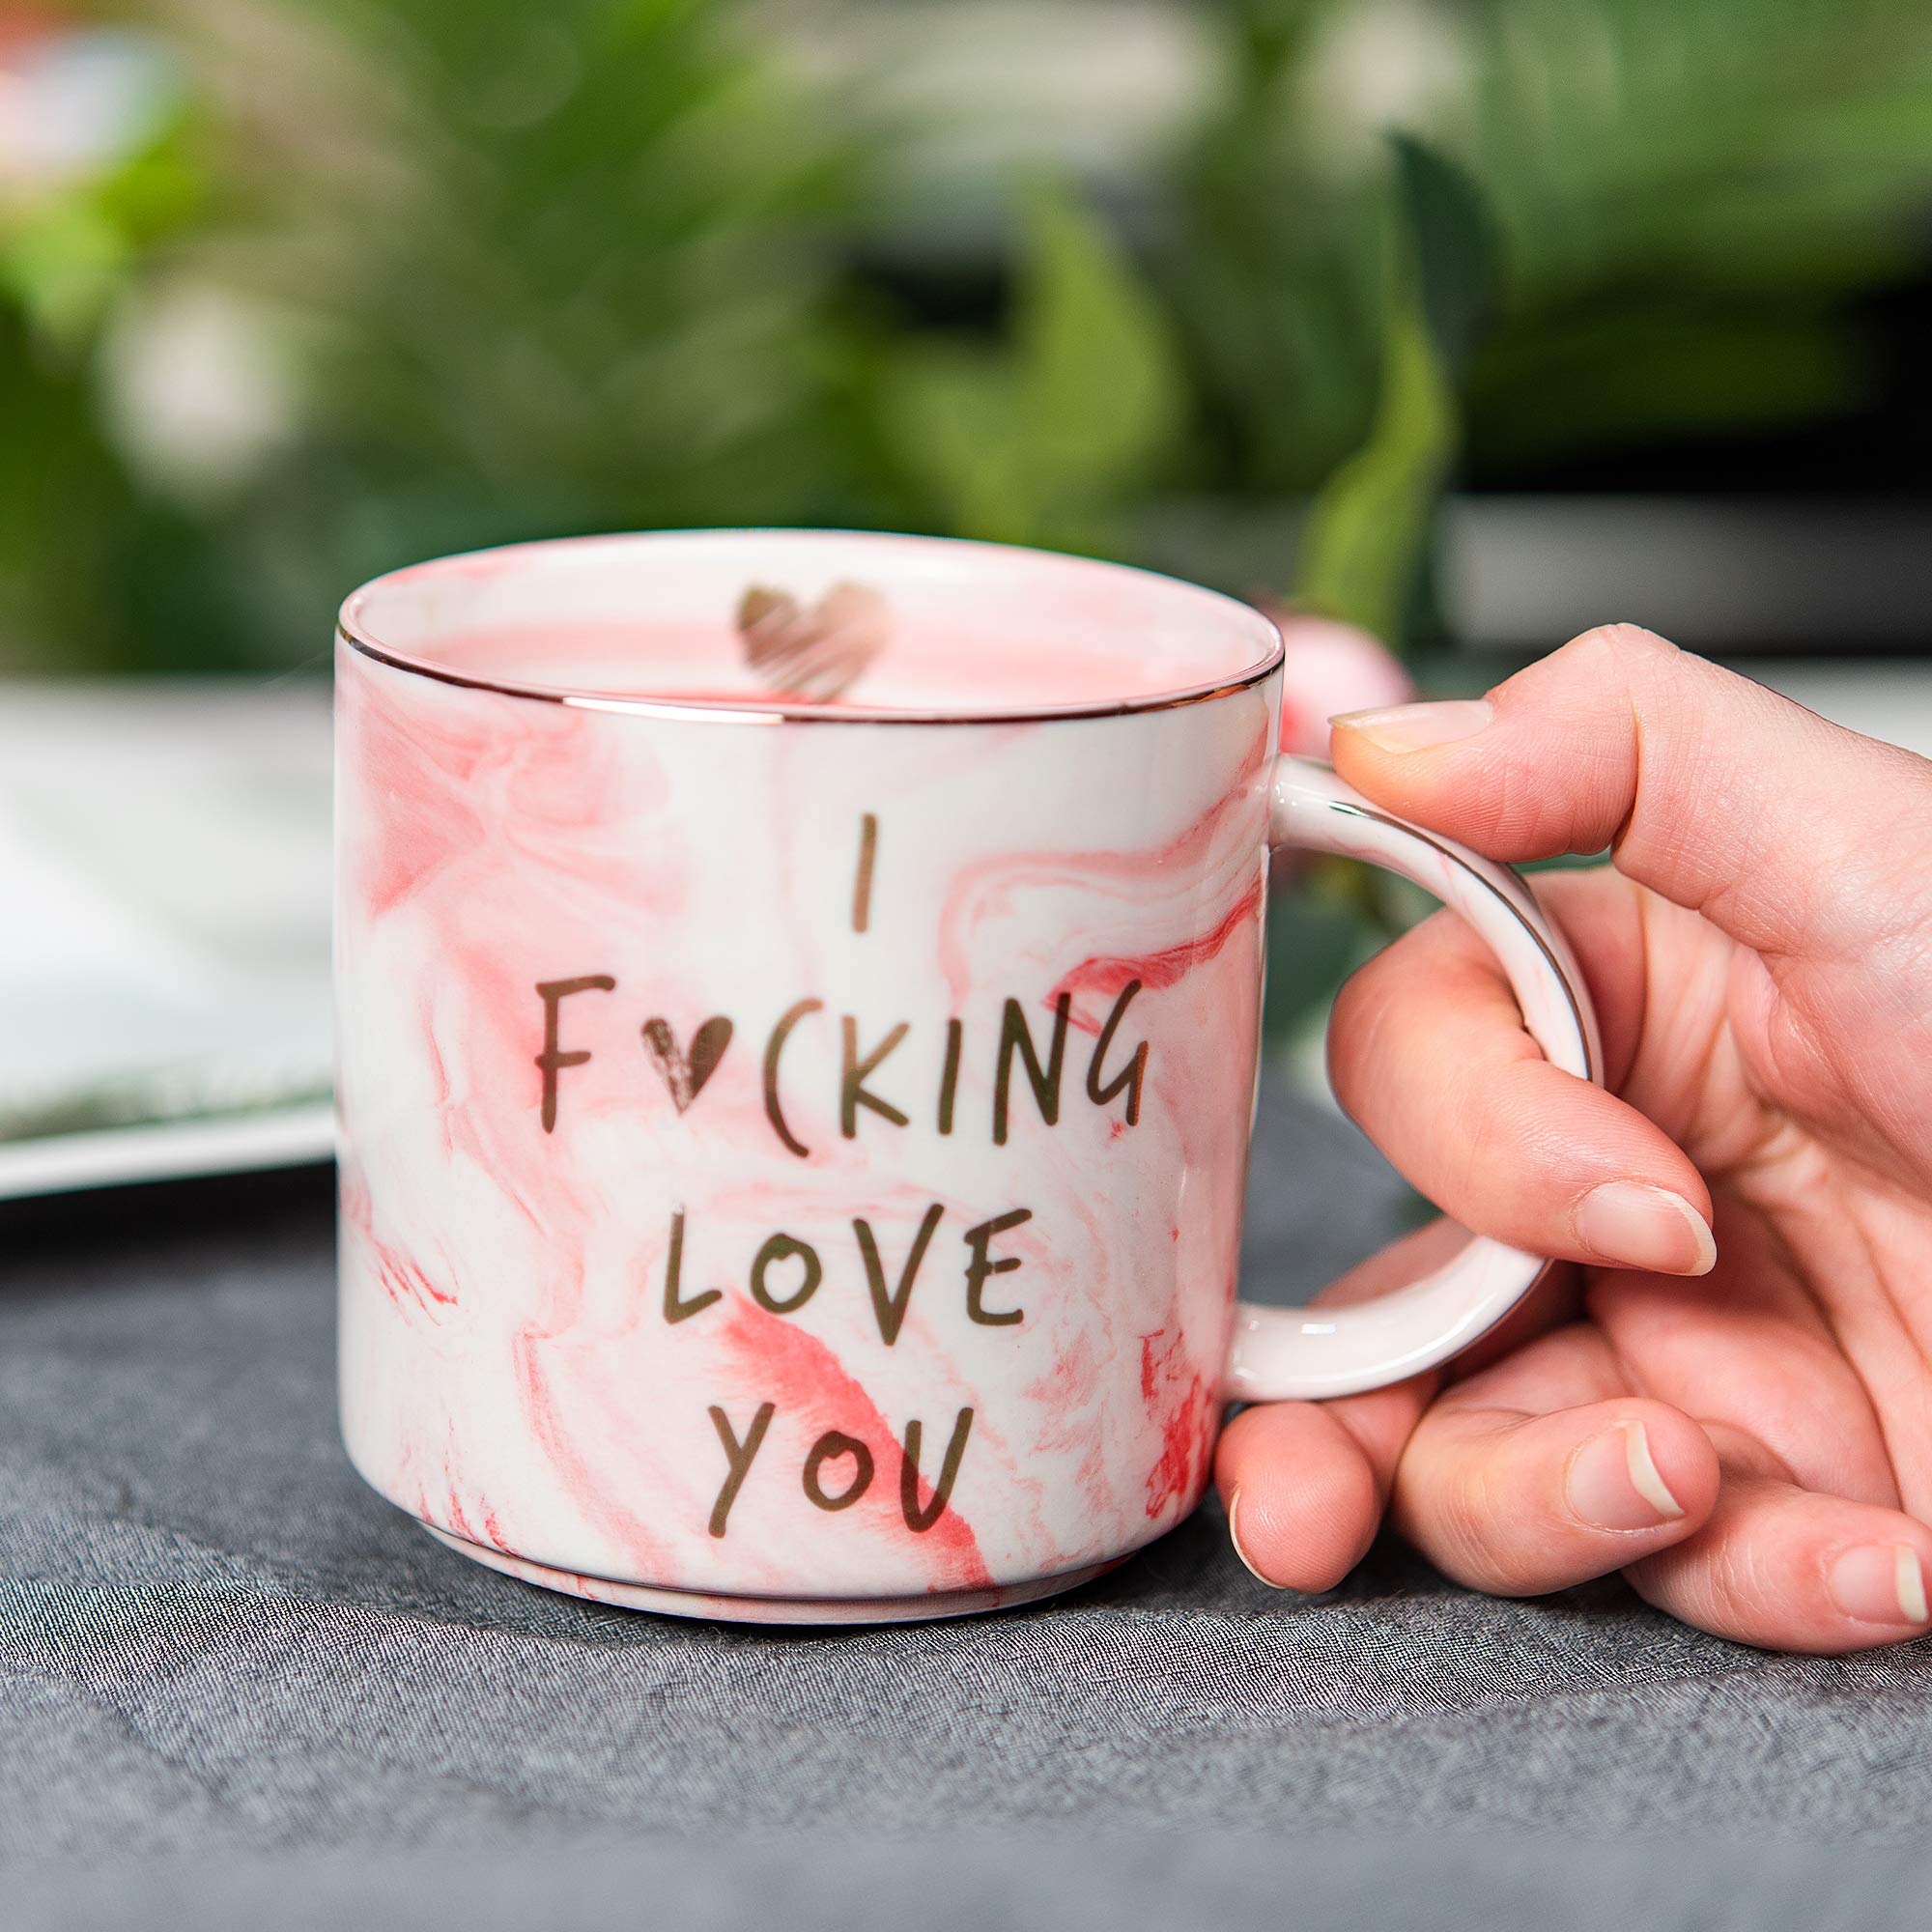 Hendson Girlfriend Anniversary, Birthday, Romantic Gift - I Love You - Cute Couple Gifts Ideas for Girlfriend, Wife, Fiance, Mom, Her, Couples - Pink Marble Mug, Ceramic 11.5oz Coffee Cup